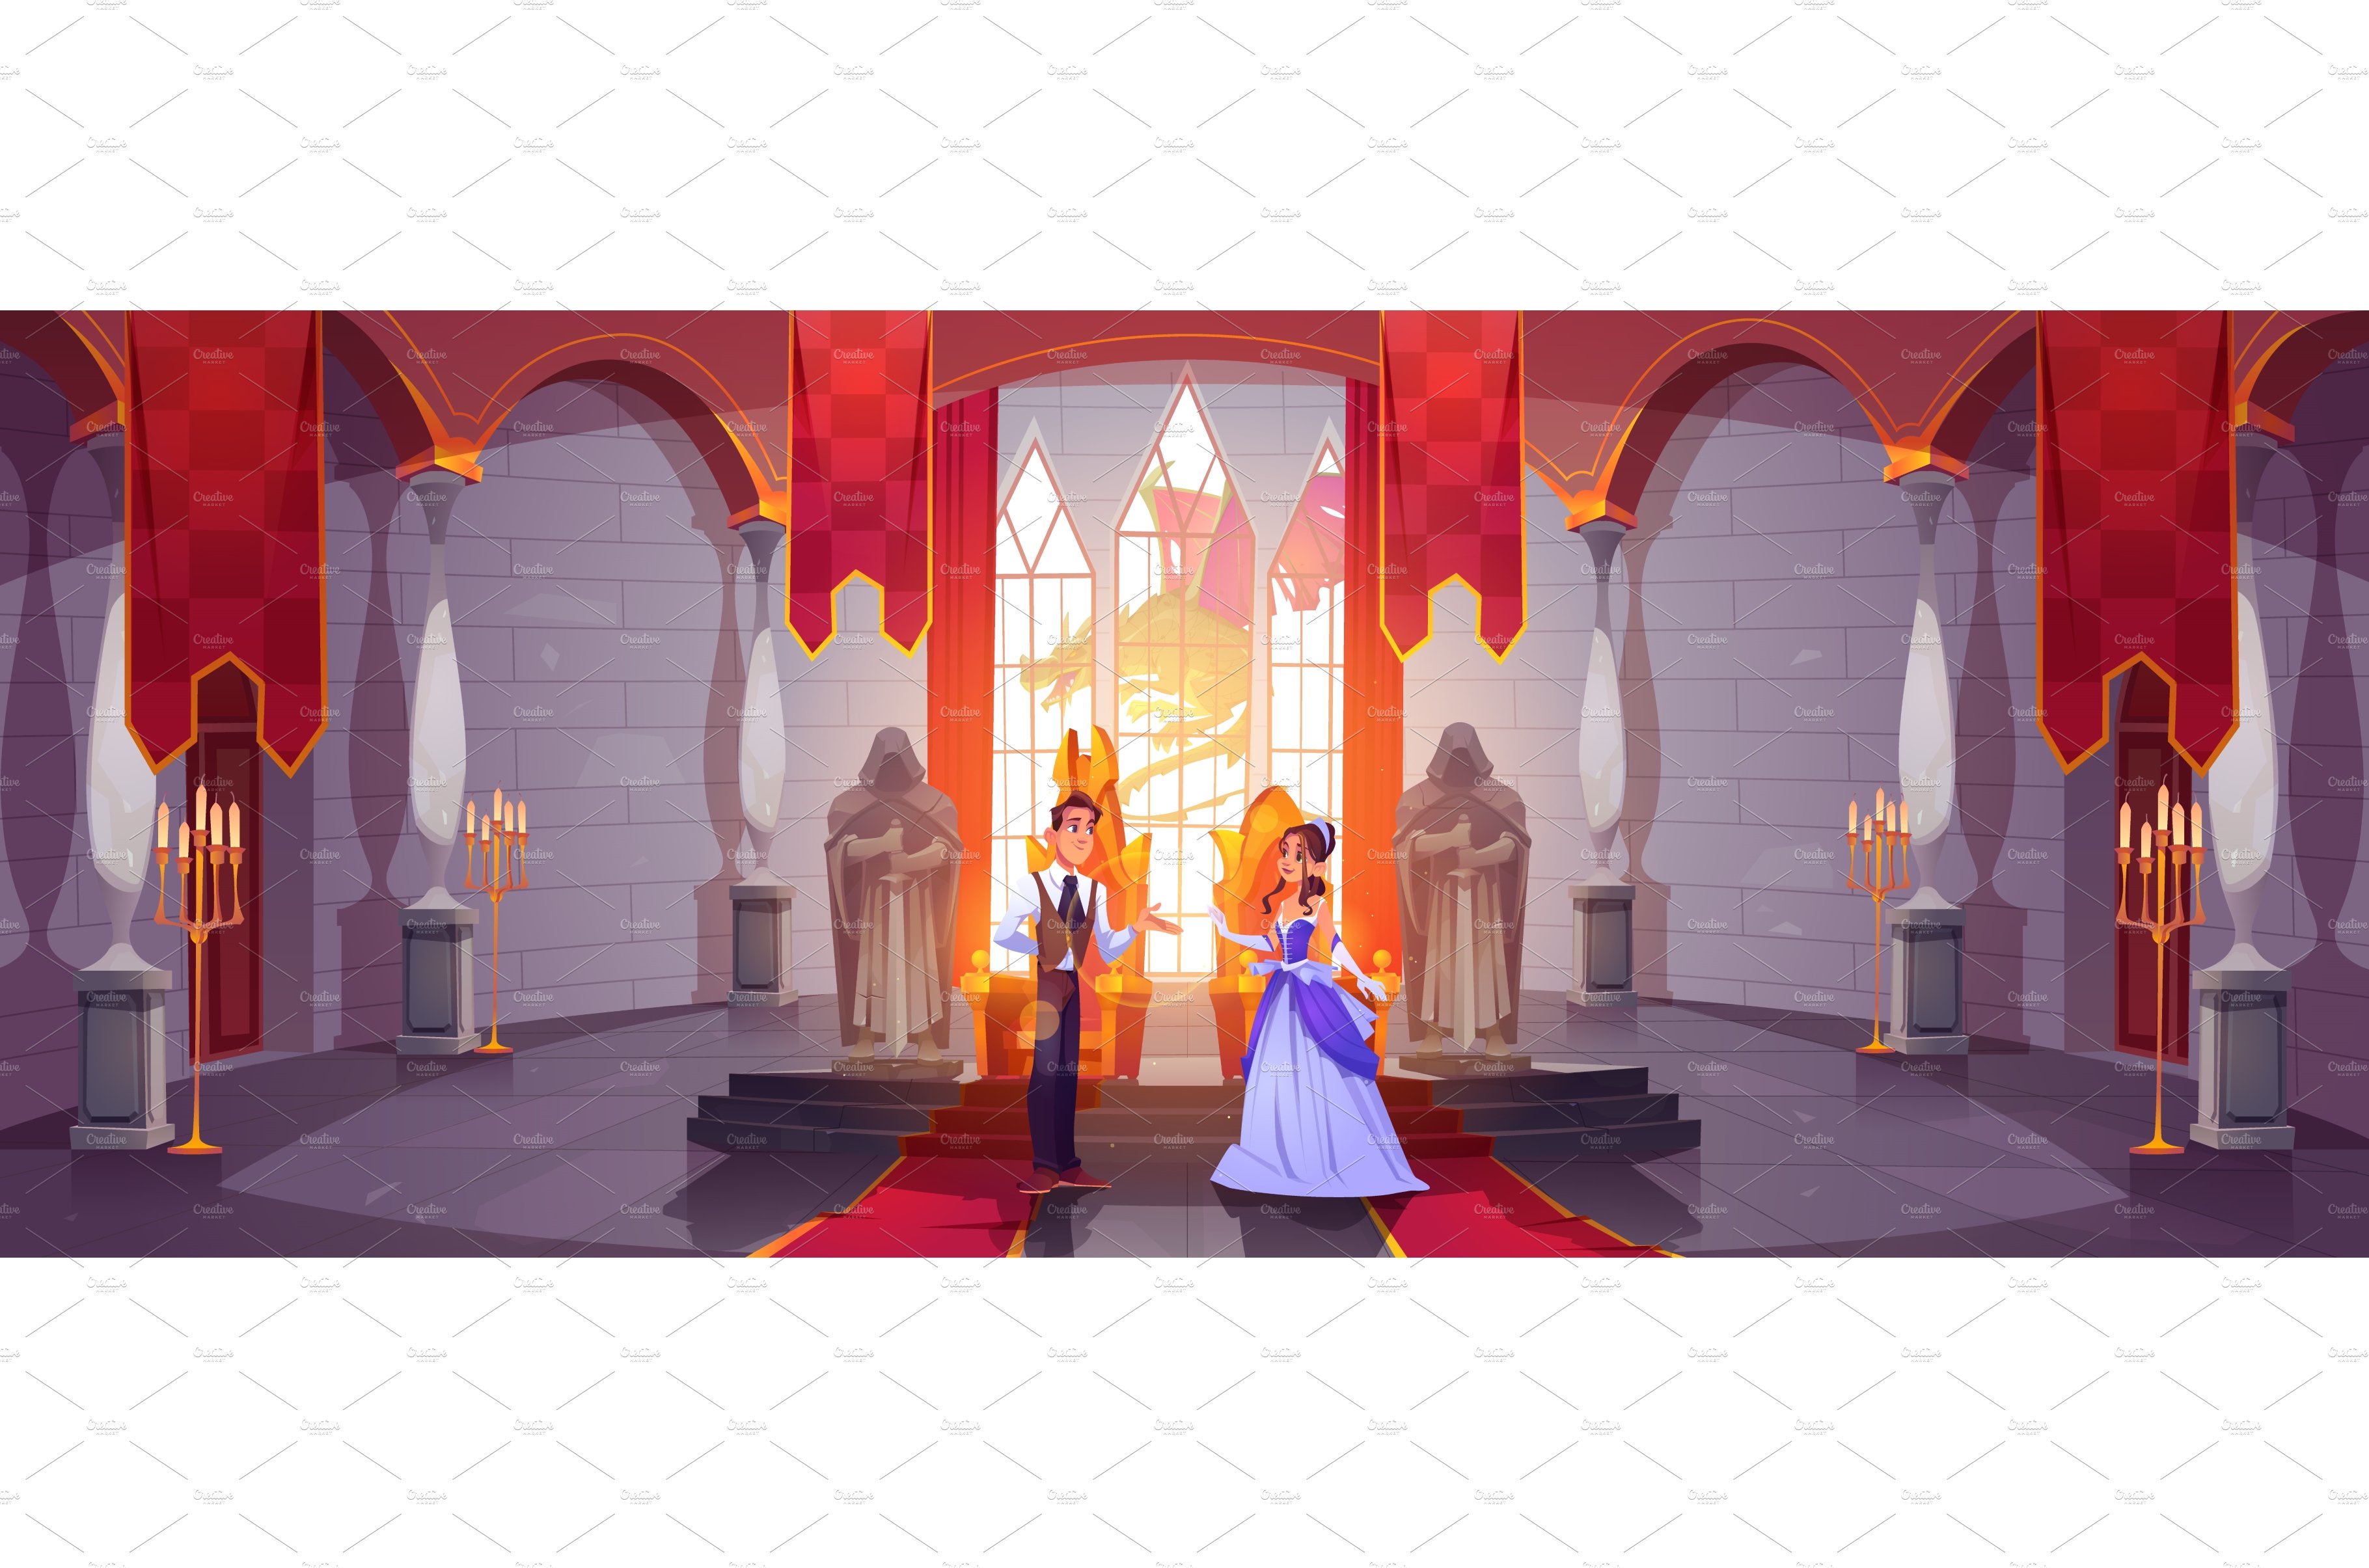 Prince and princess in throne room cover image.